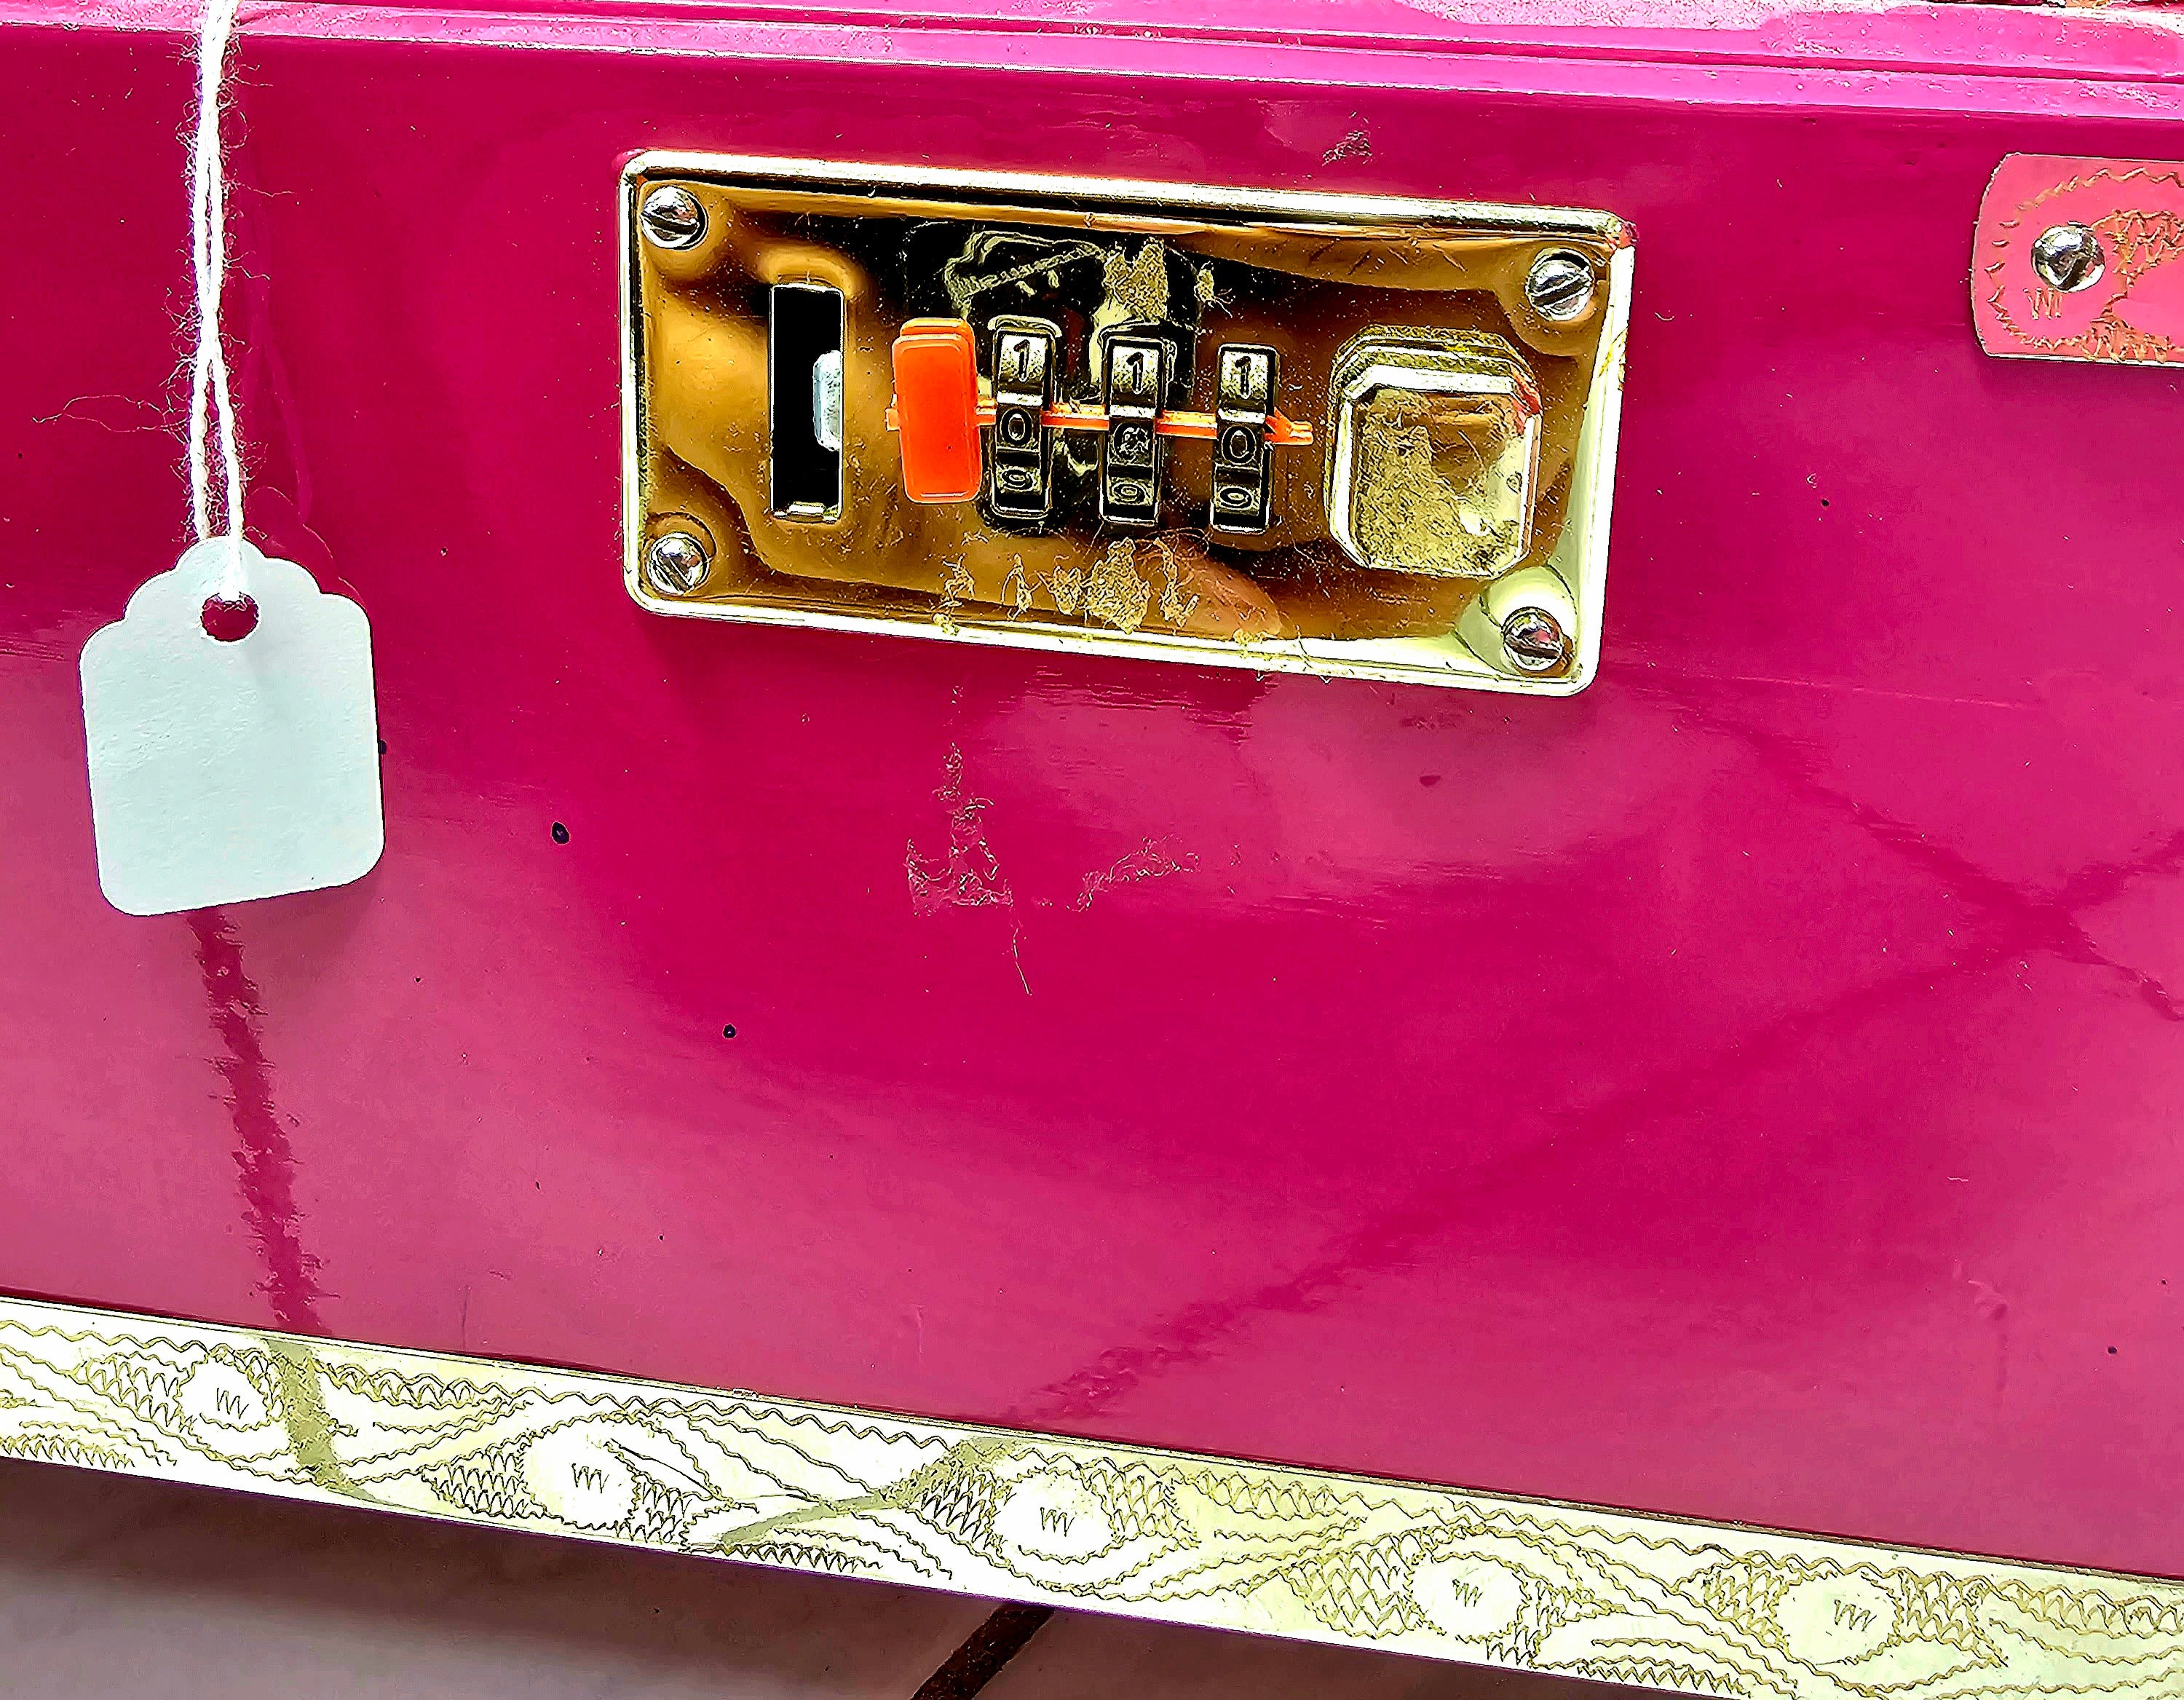 Vivid Harmonies: Bold Pink 4 Reed 13 Scale-Changer Harmonium with Cosmetic Defects